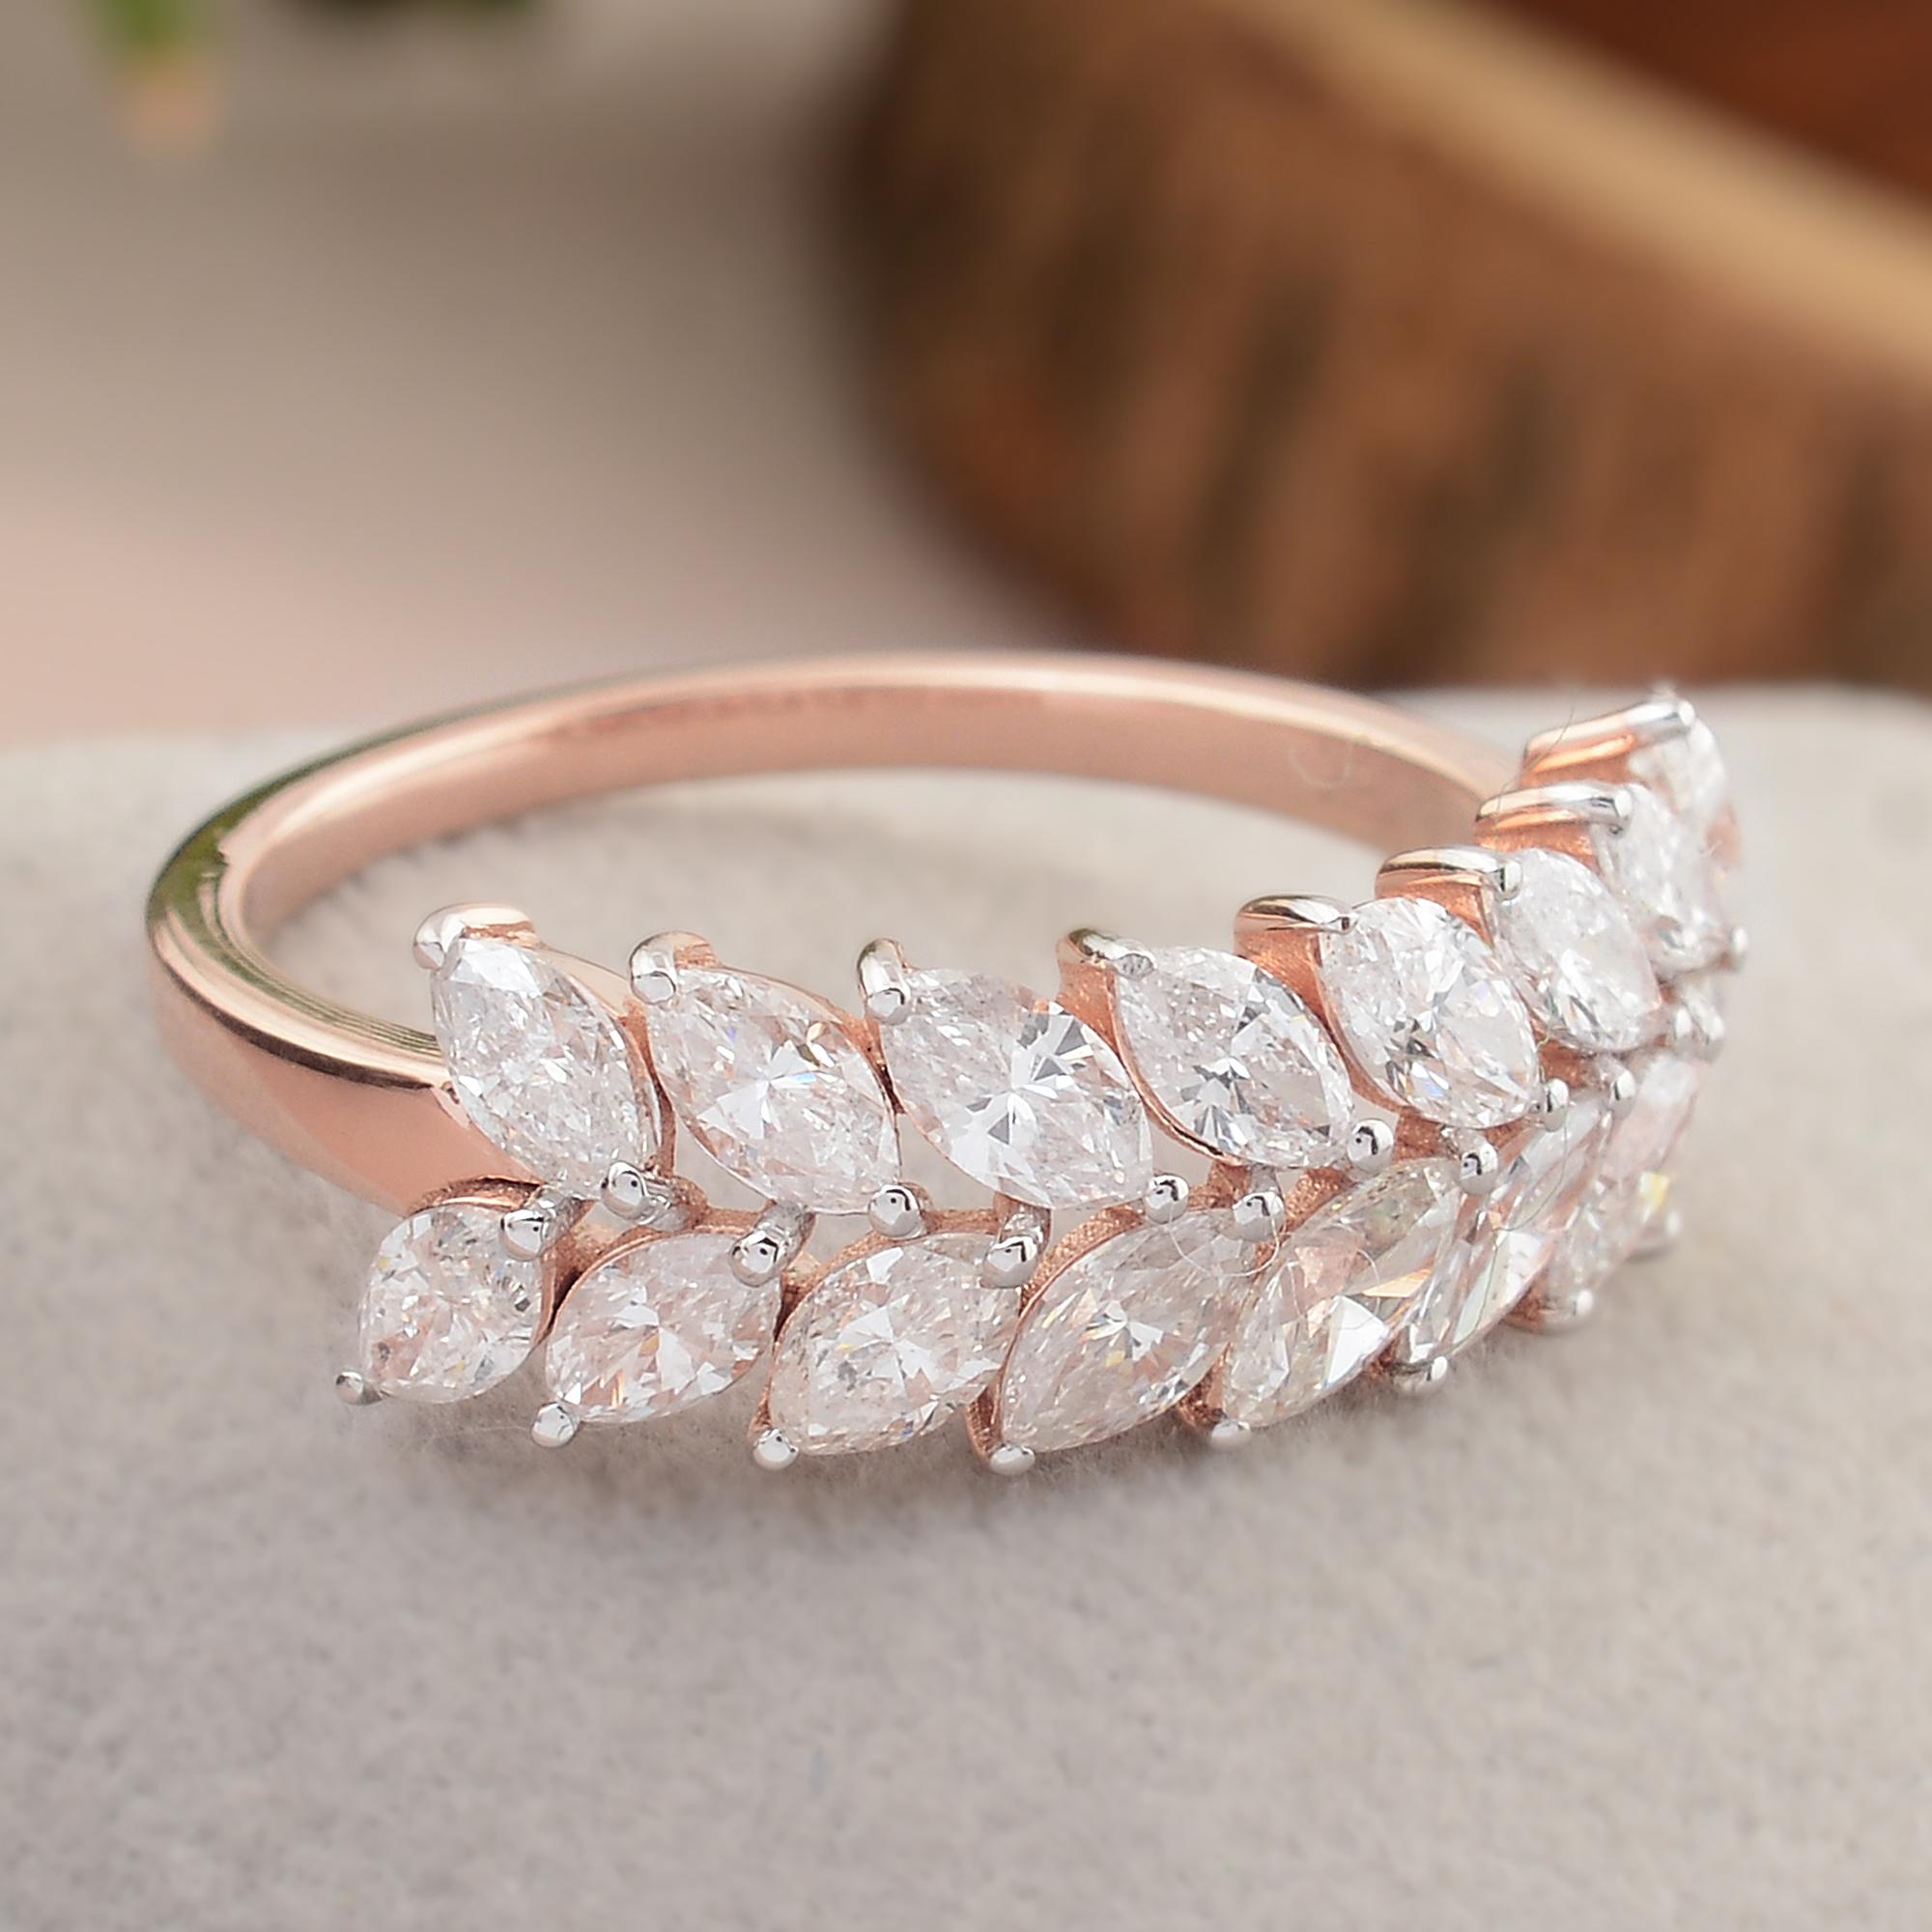 For Sale:  1.80 Carat Marquise Diamond Wedding Ring Solid 18k Rose Gold Handmade Jewelry 5